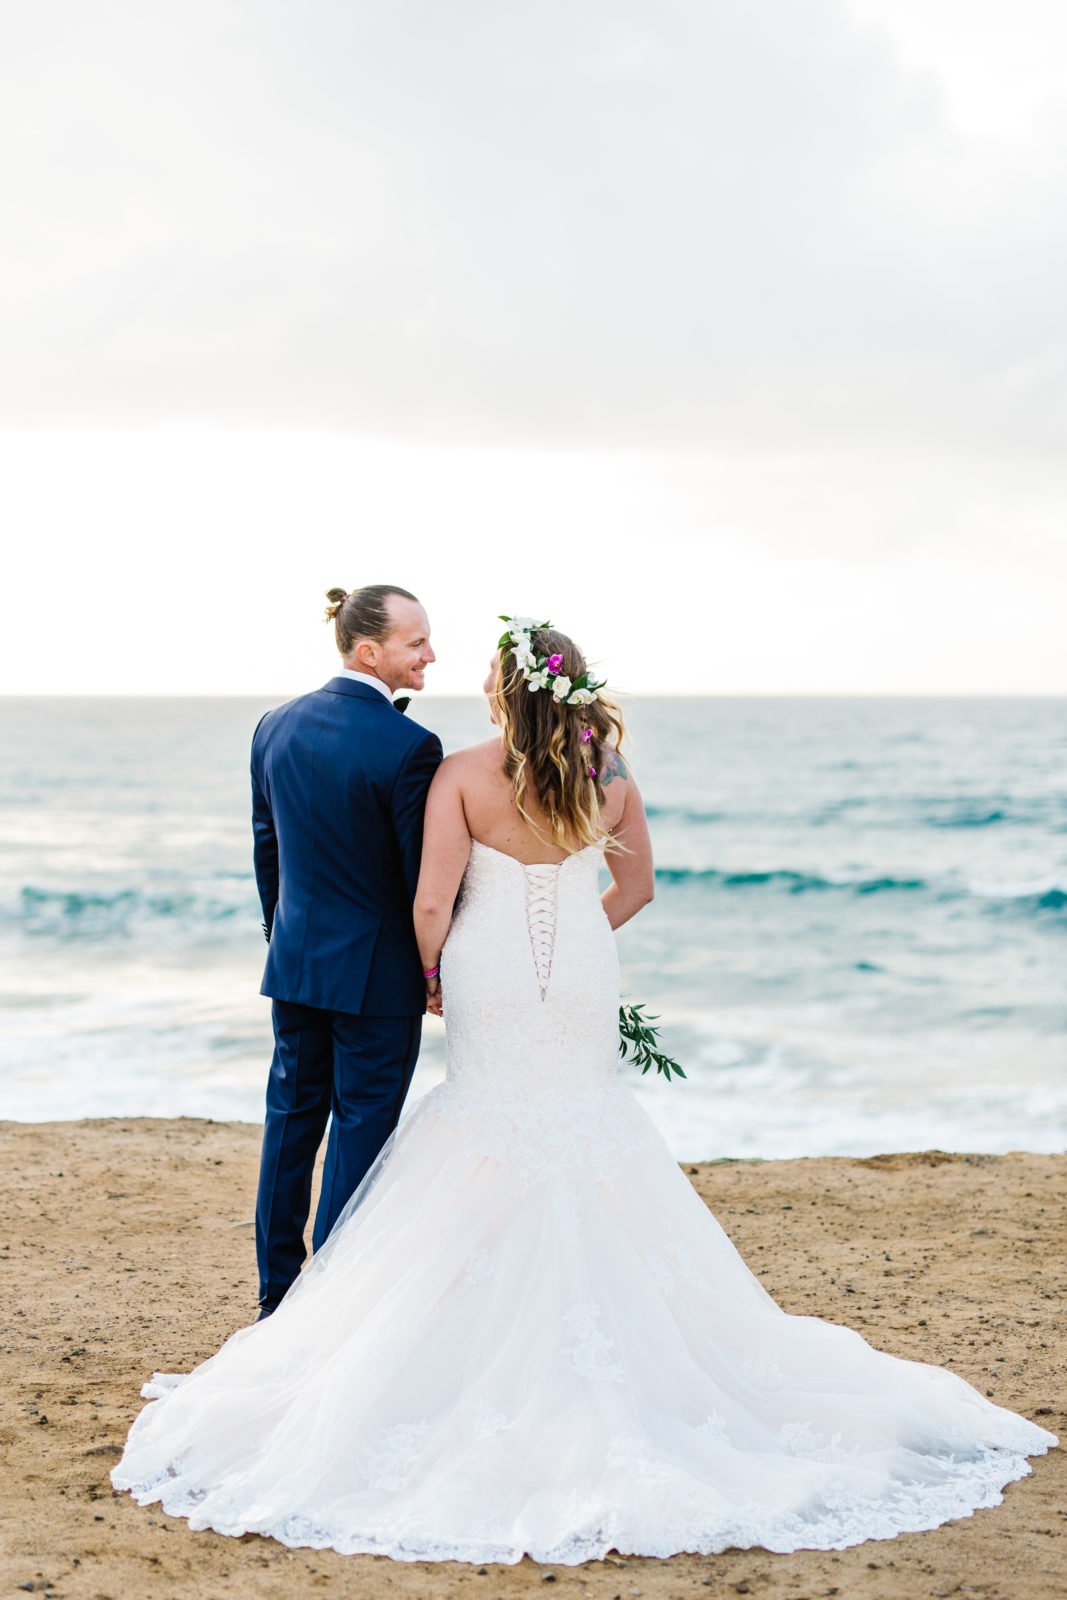 back of bride and groom by the ocean at sunset cliffs wedding